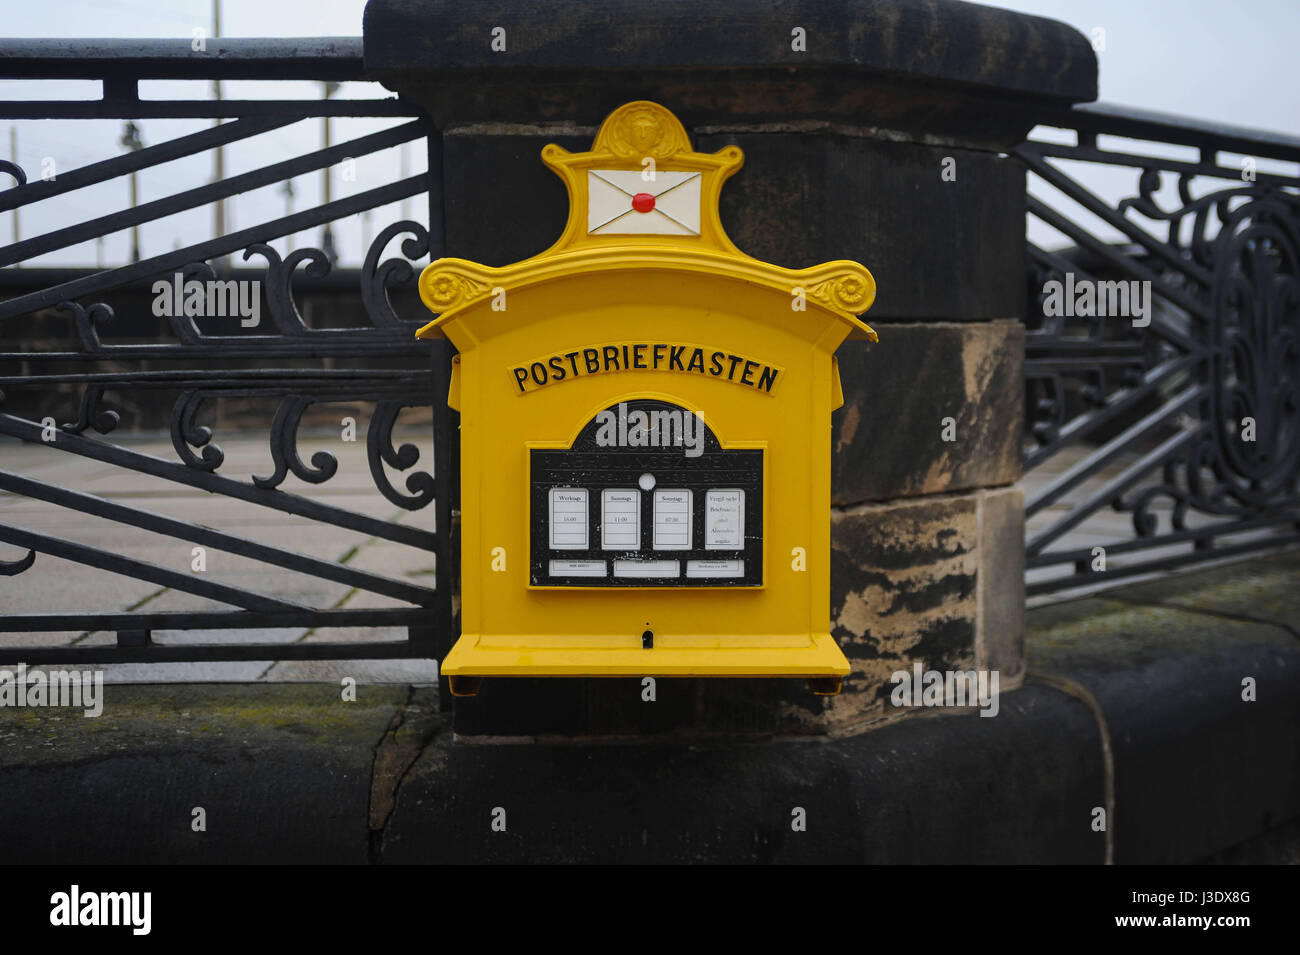 Ddr Briefkasten High Resolution Stock Photography and Images - Alamy